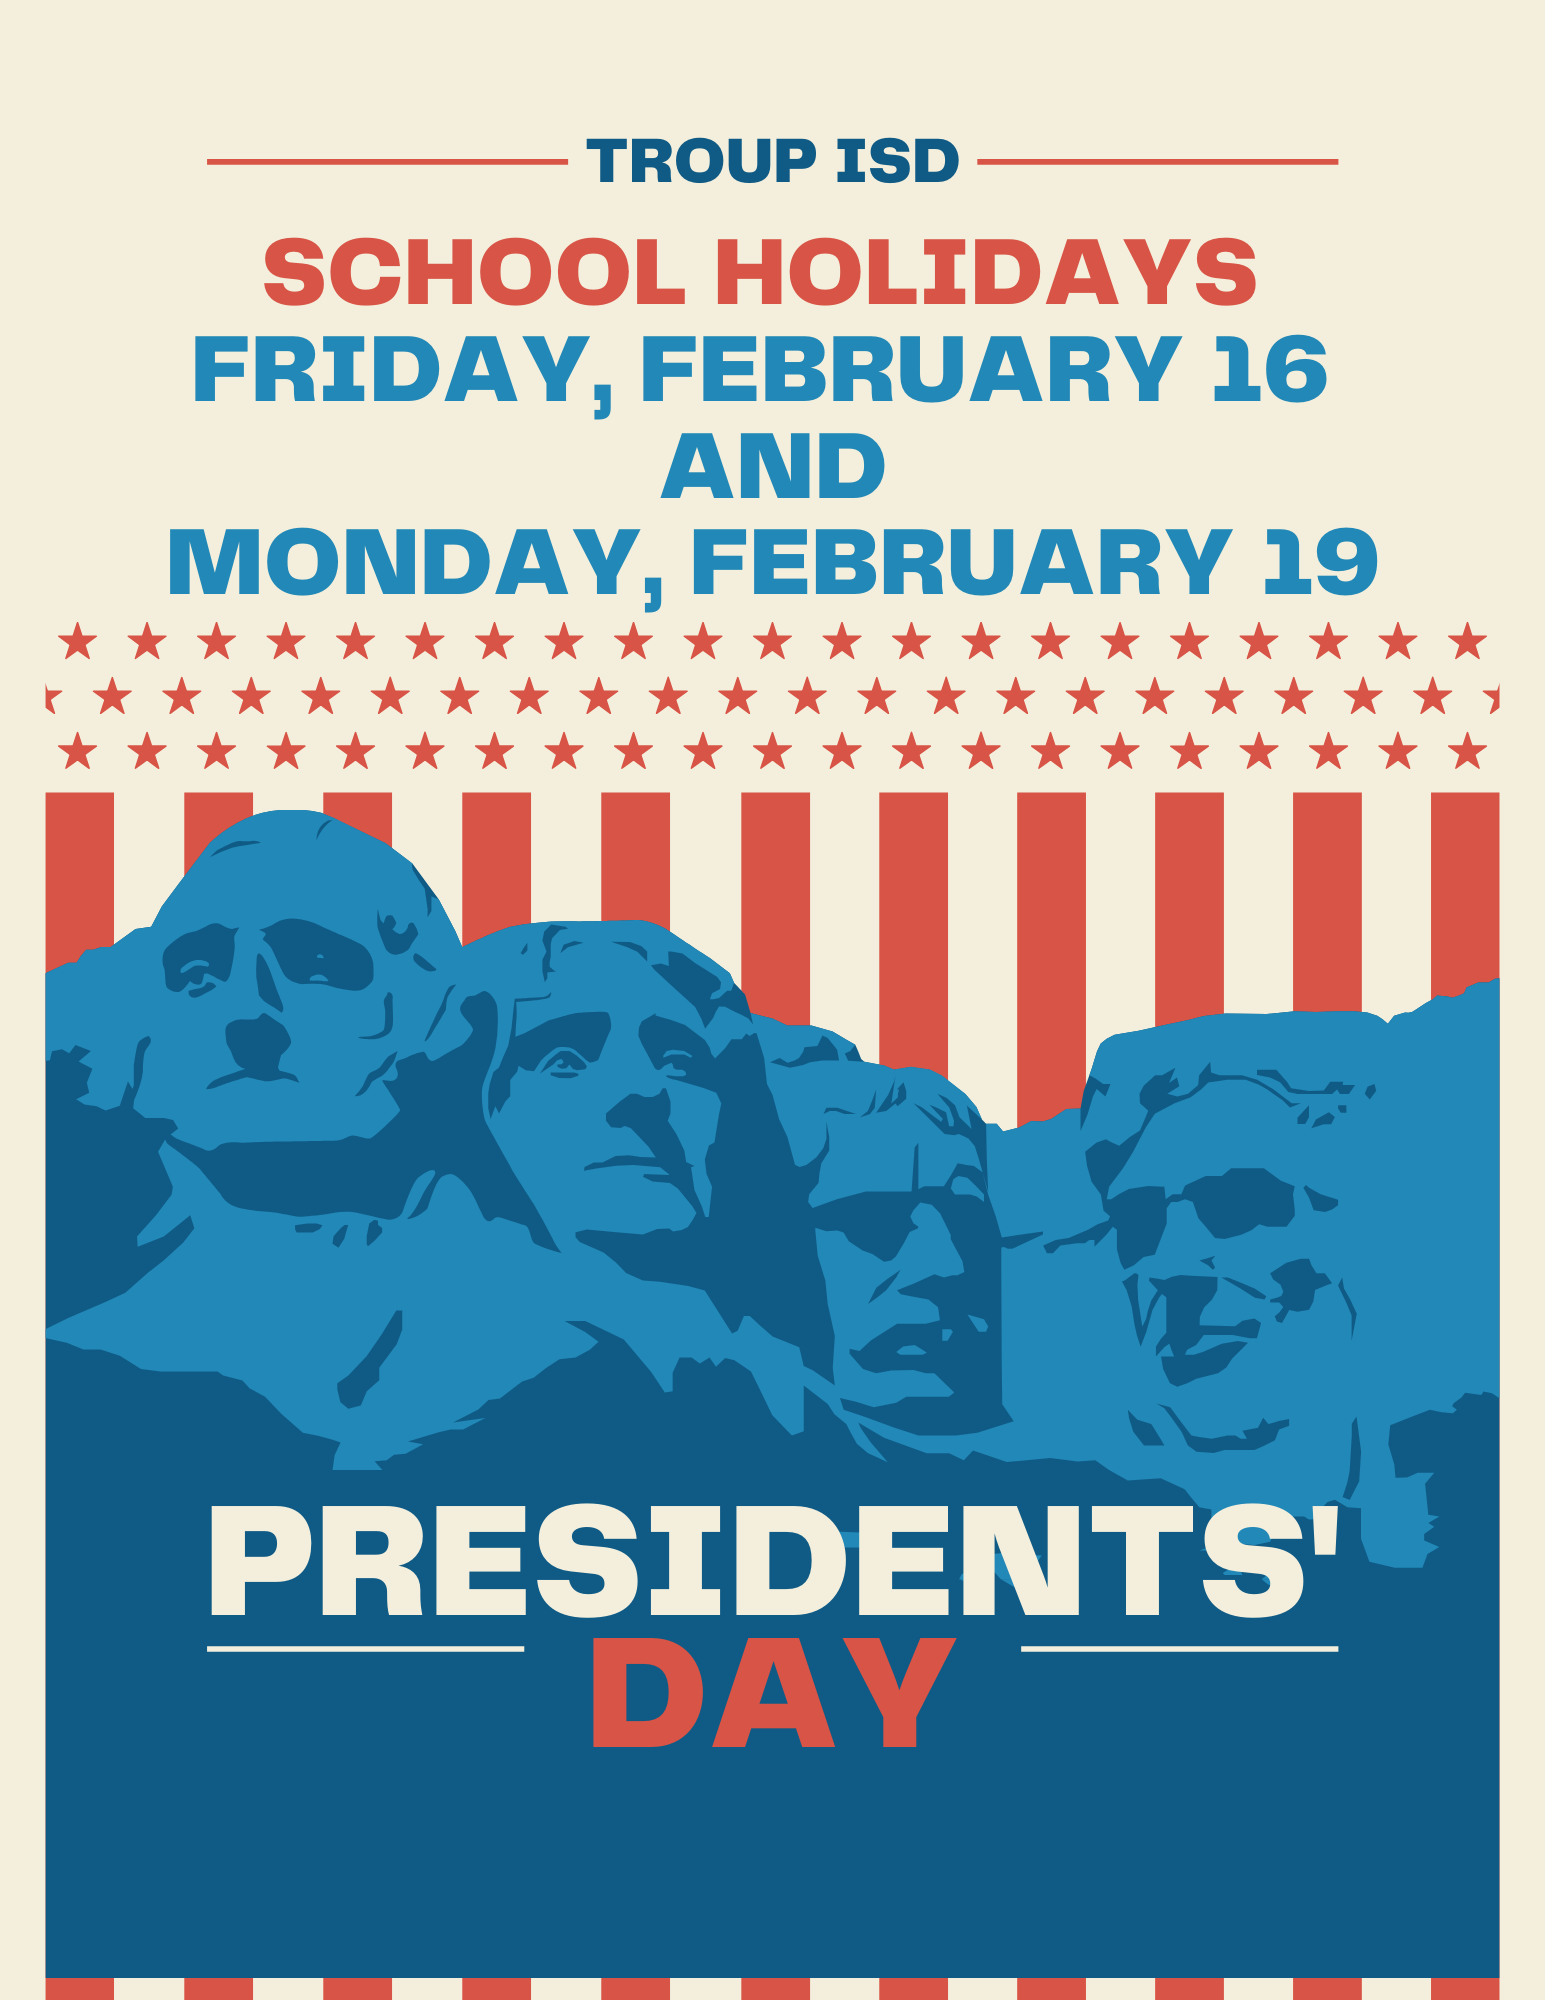 presidents' day holiday